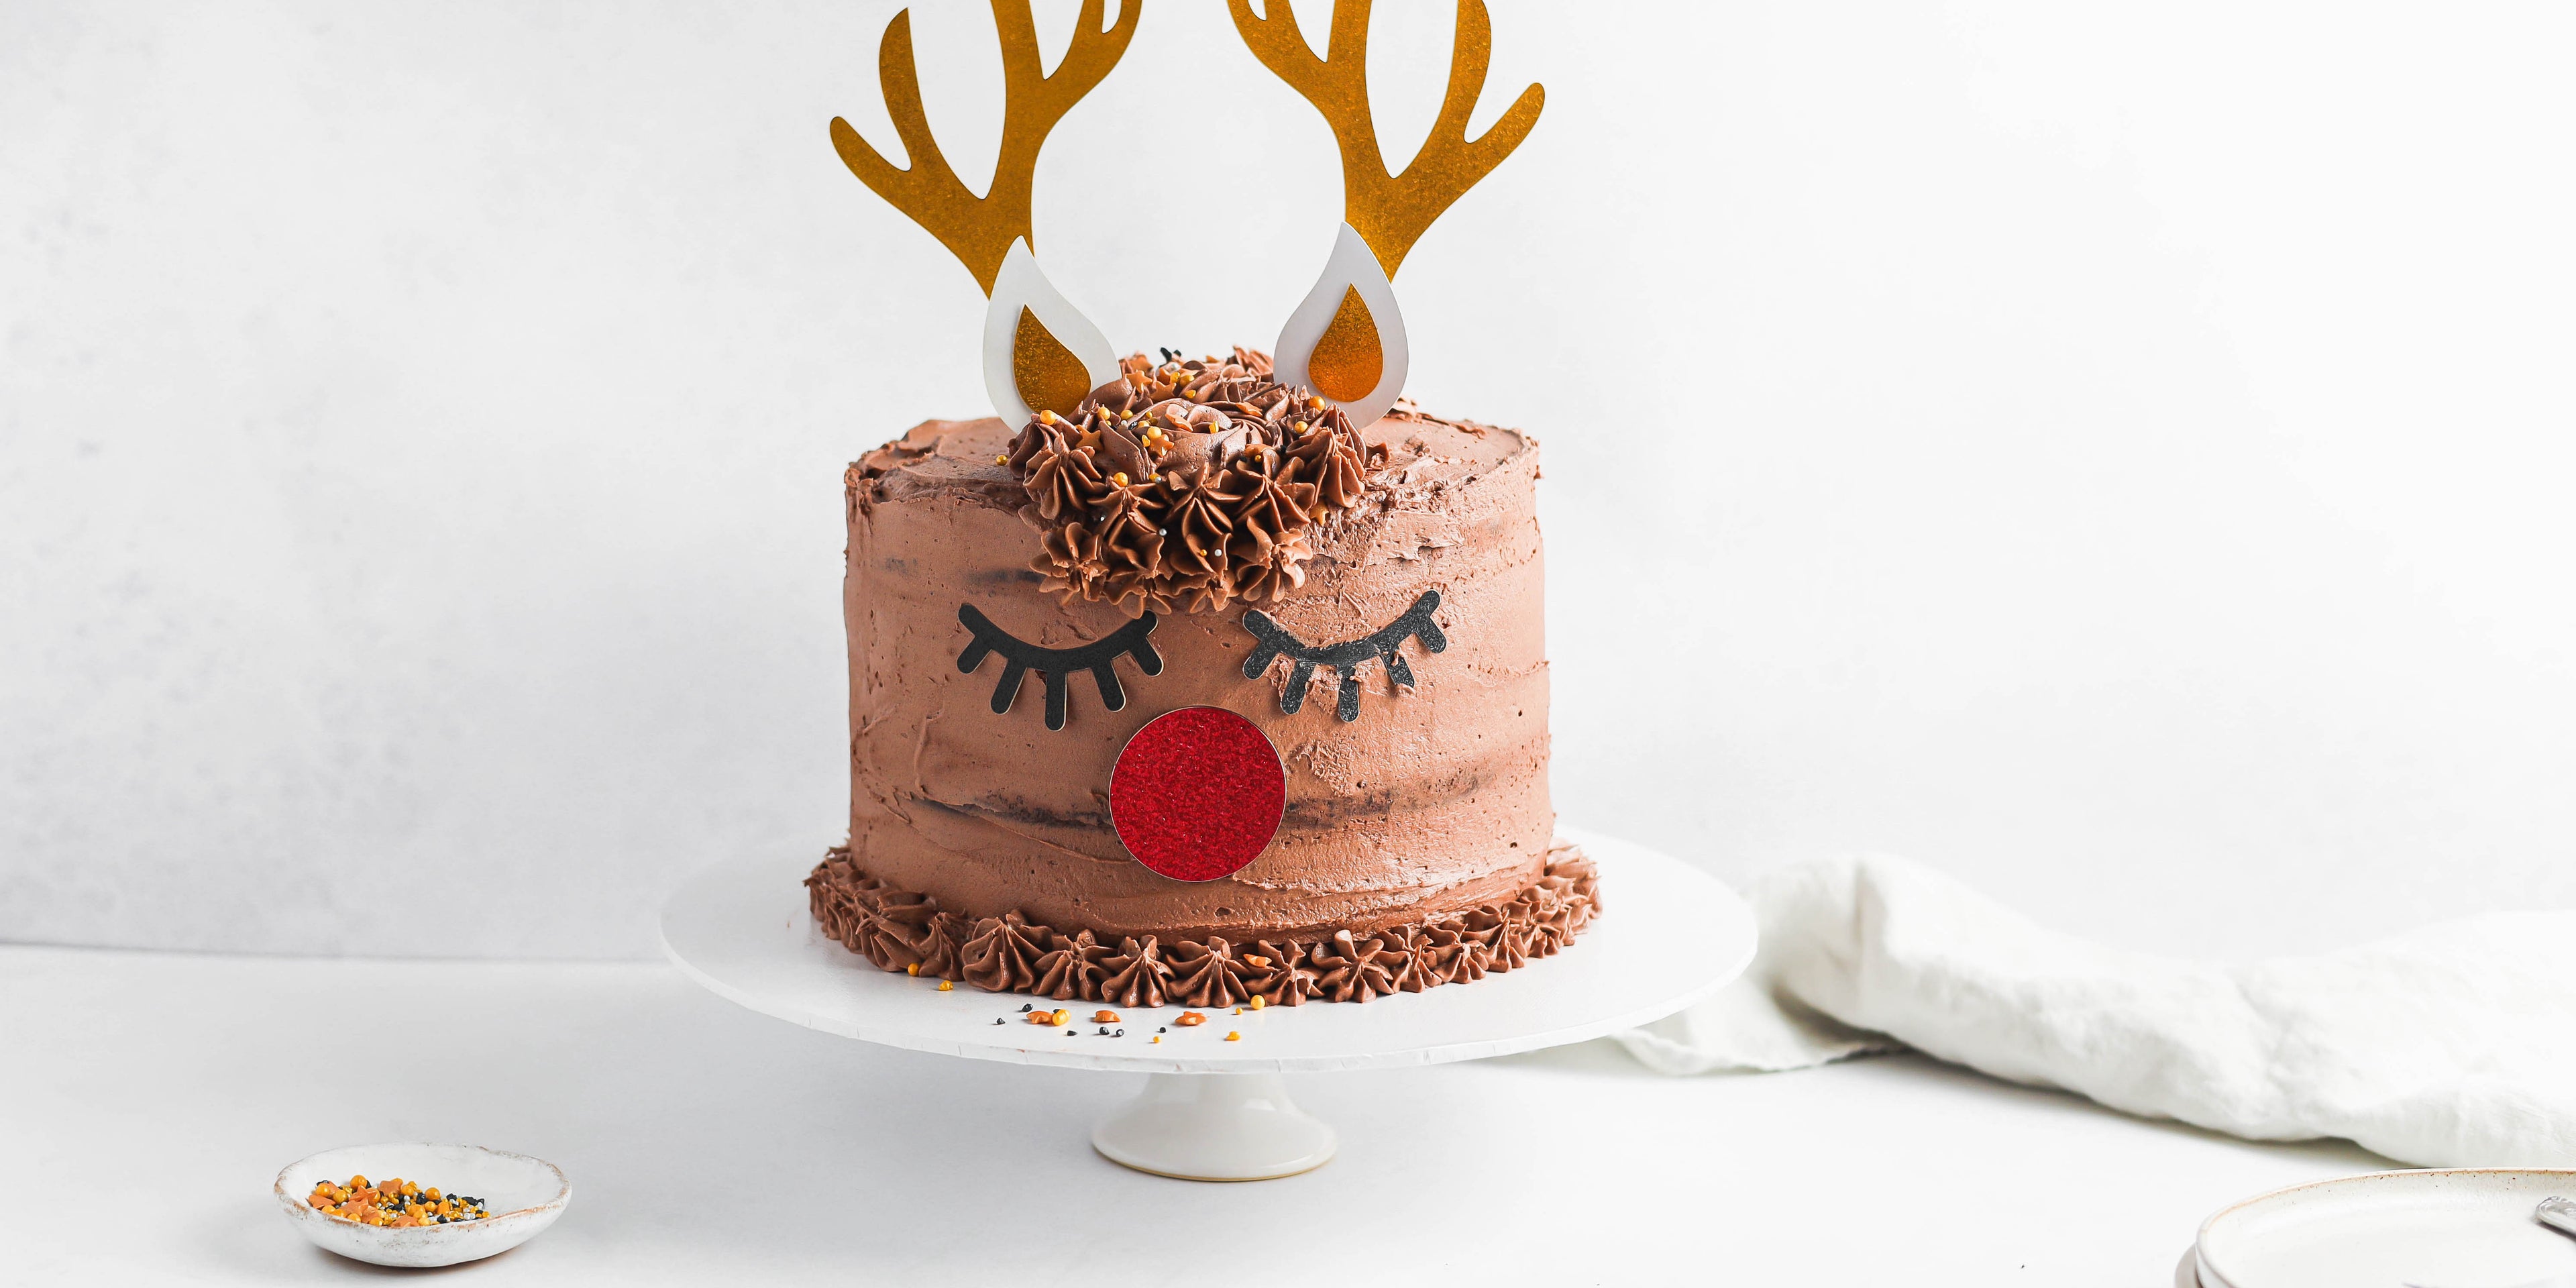 Christmas Reindeer Cake next to a dish of hundreds and thousands on a white cake stand, decorated with golden reindeer antlers